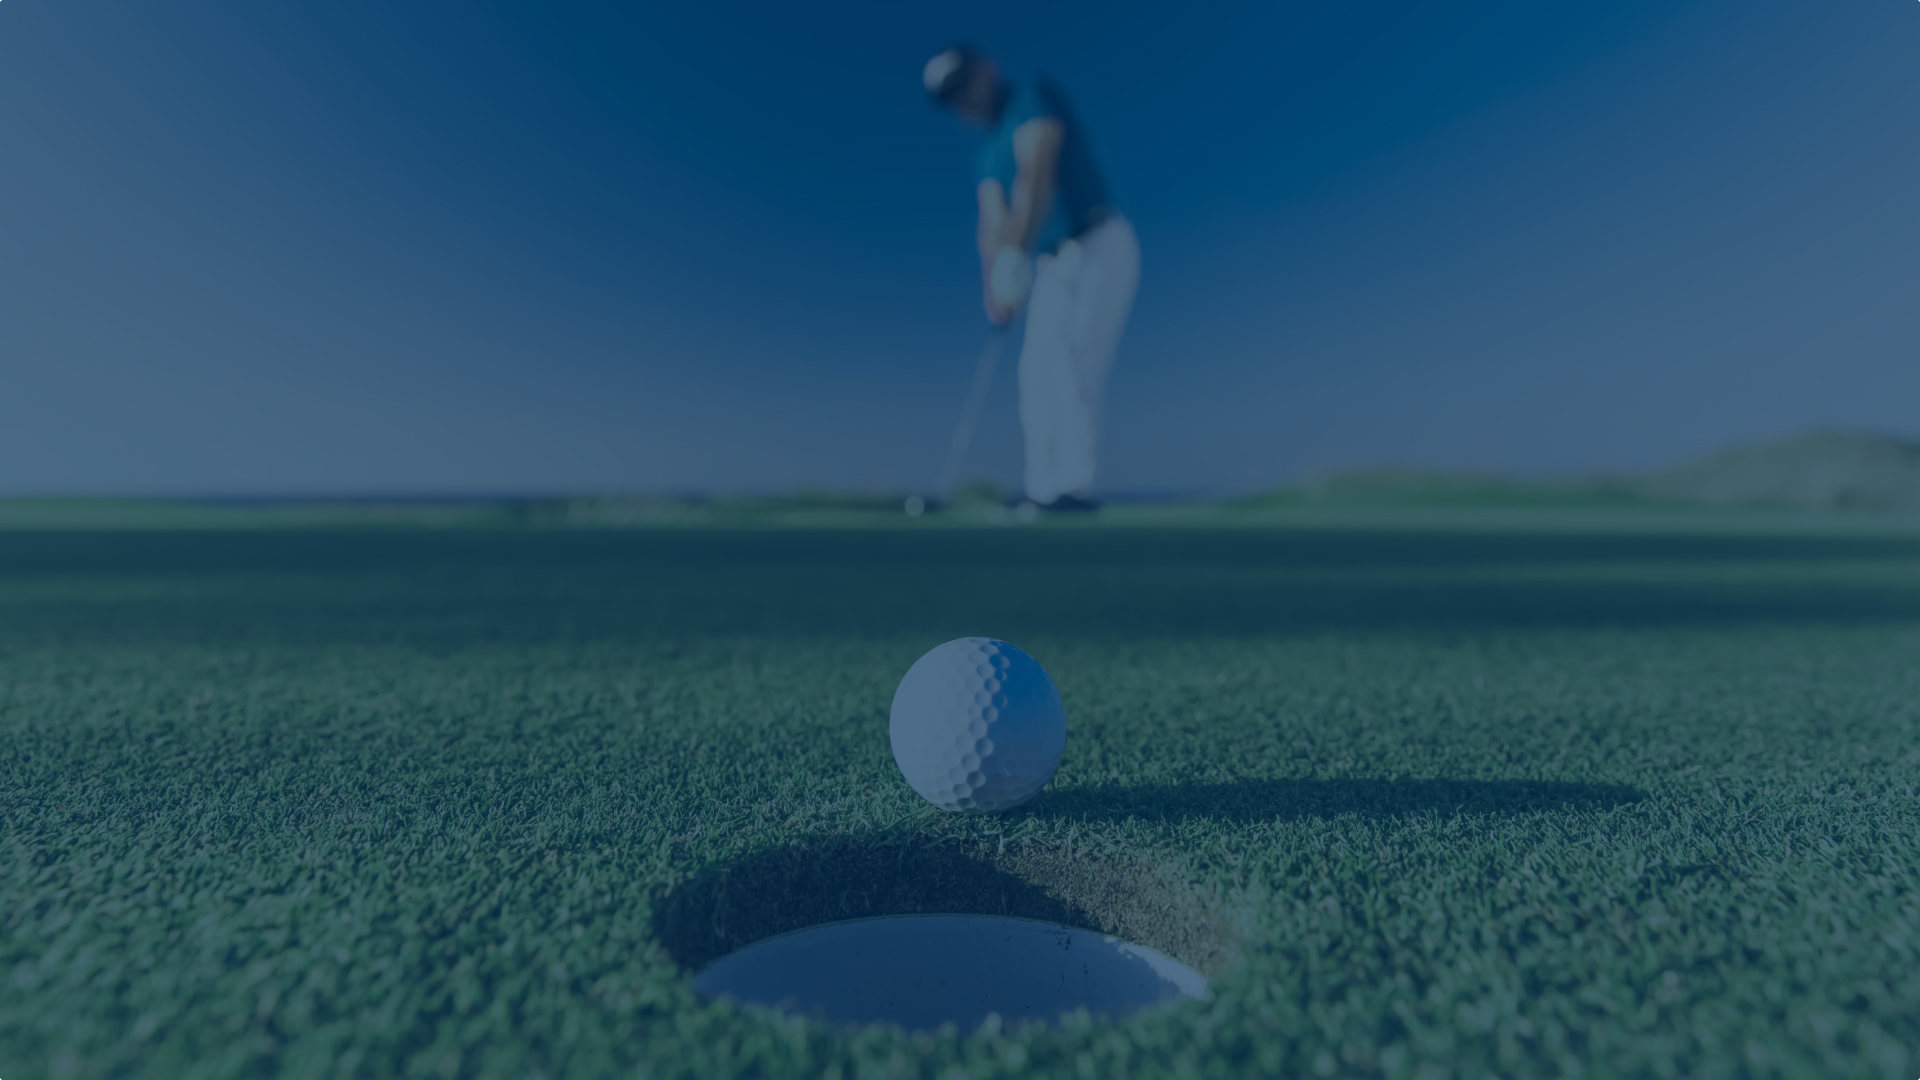 Closeup of golf ball going into the hole after a putt